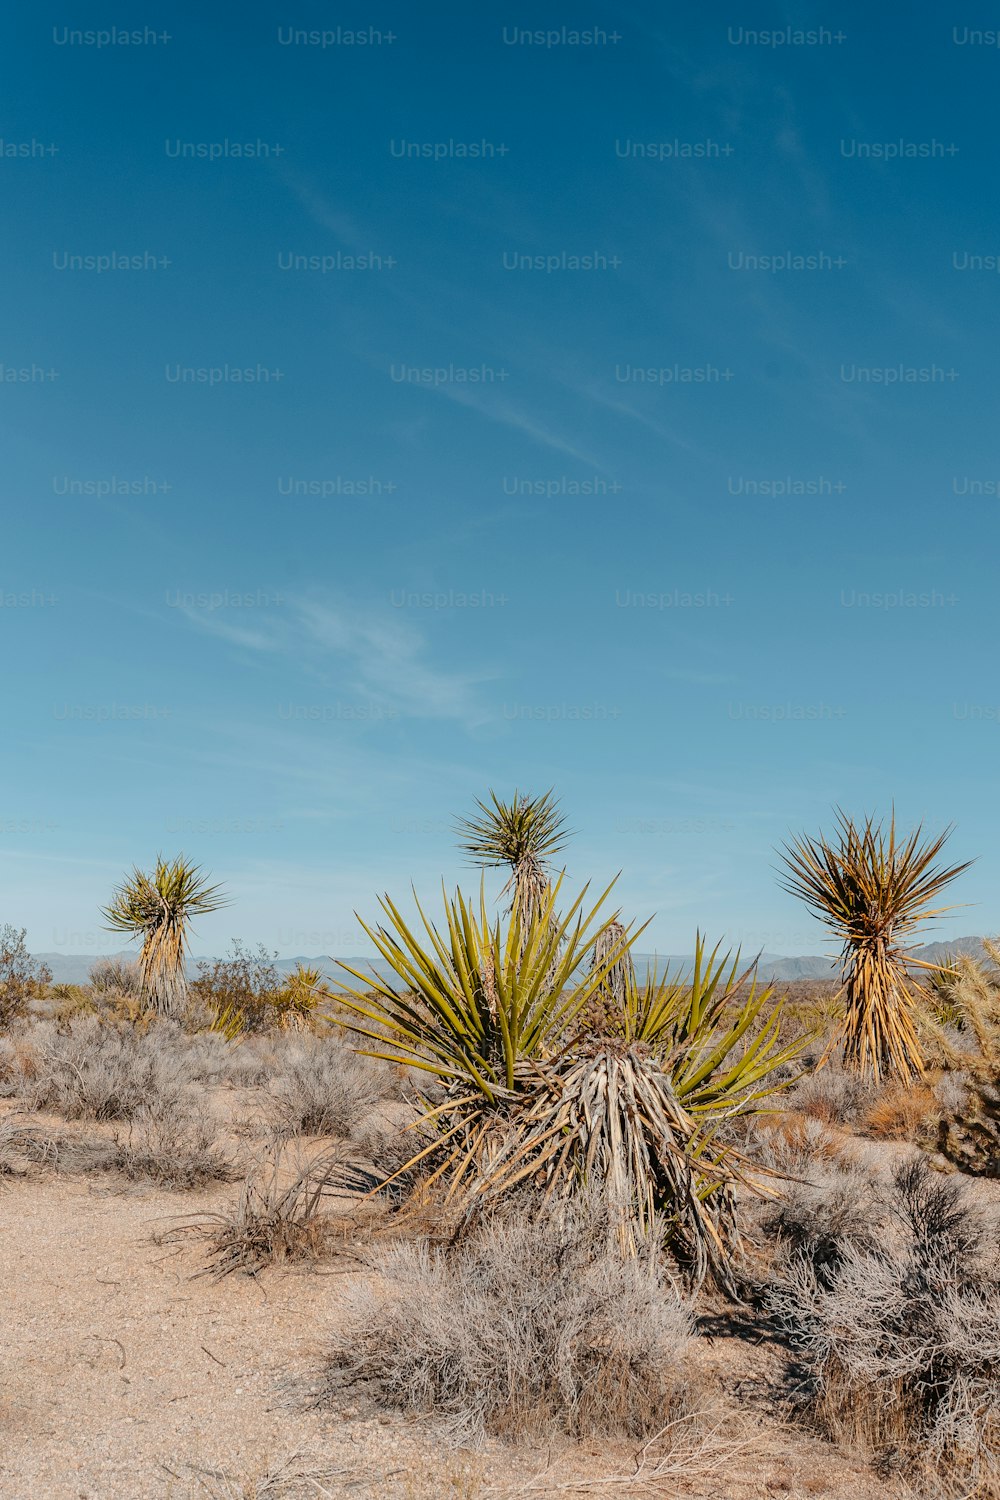 a group of plants in the desert with a blue sky in the background